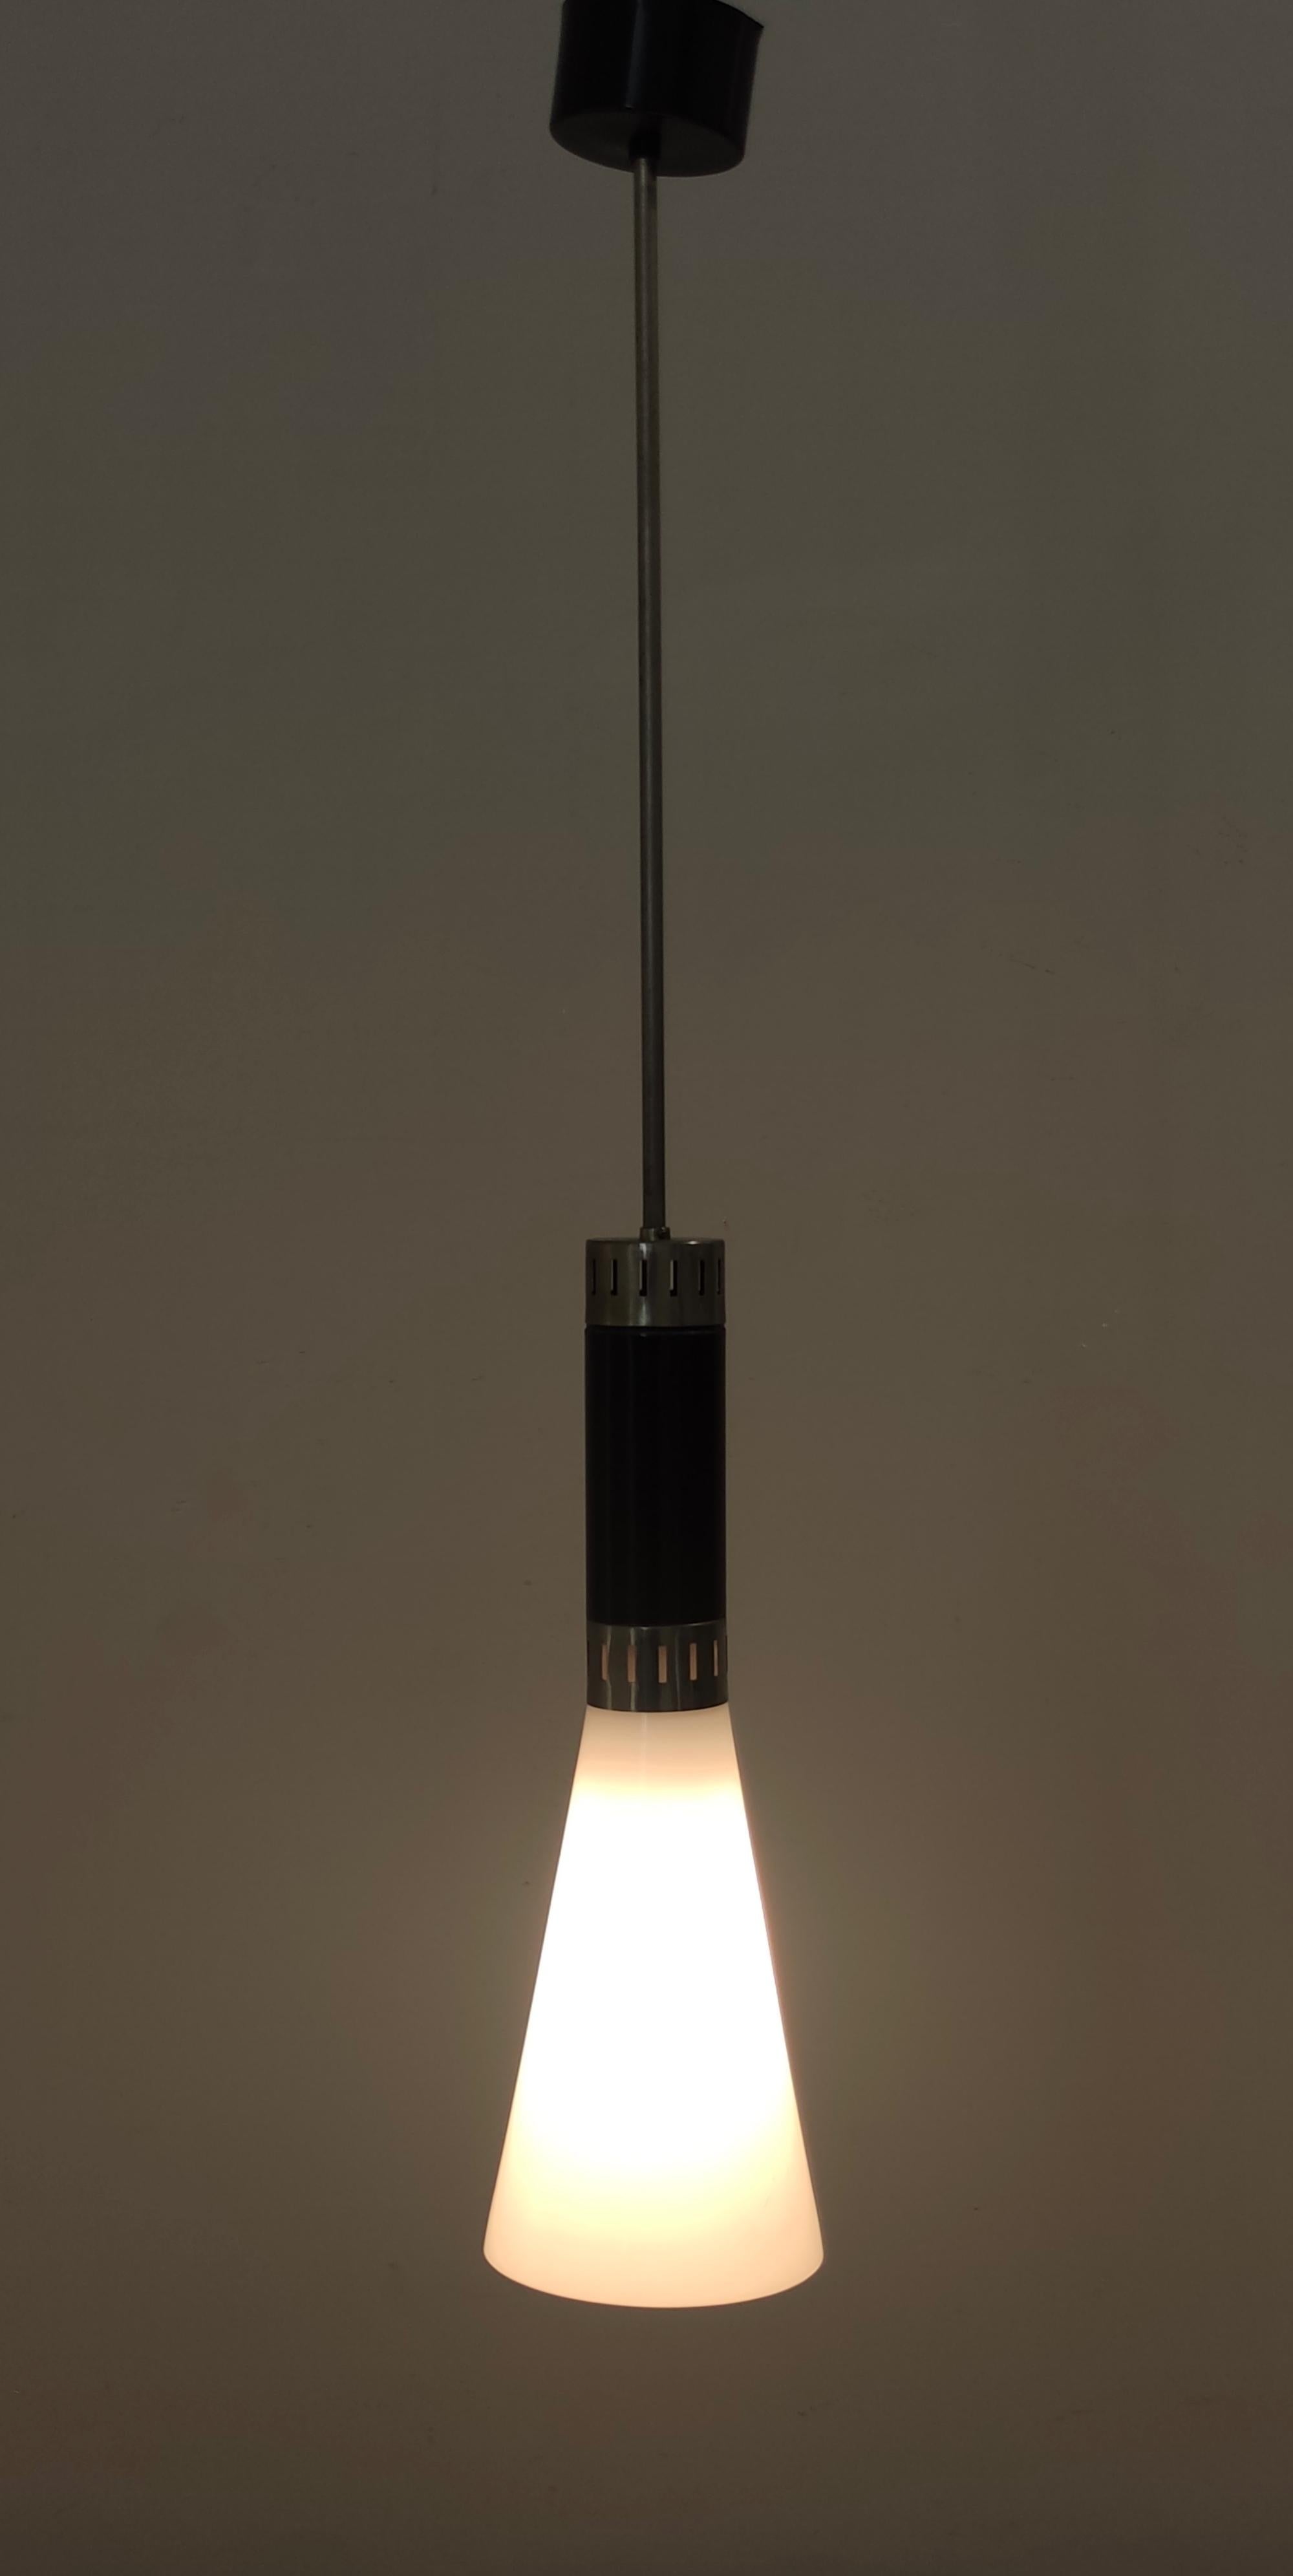 Made in Italy, 1960s.
It is in opaline glass, chrome plated brass and black varnished aluminum.
This pendant is a vintage item, therefore it might show slight traces of use, but it can be considered as in excellent original condition and ready to